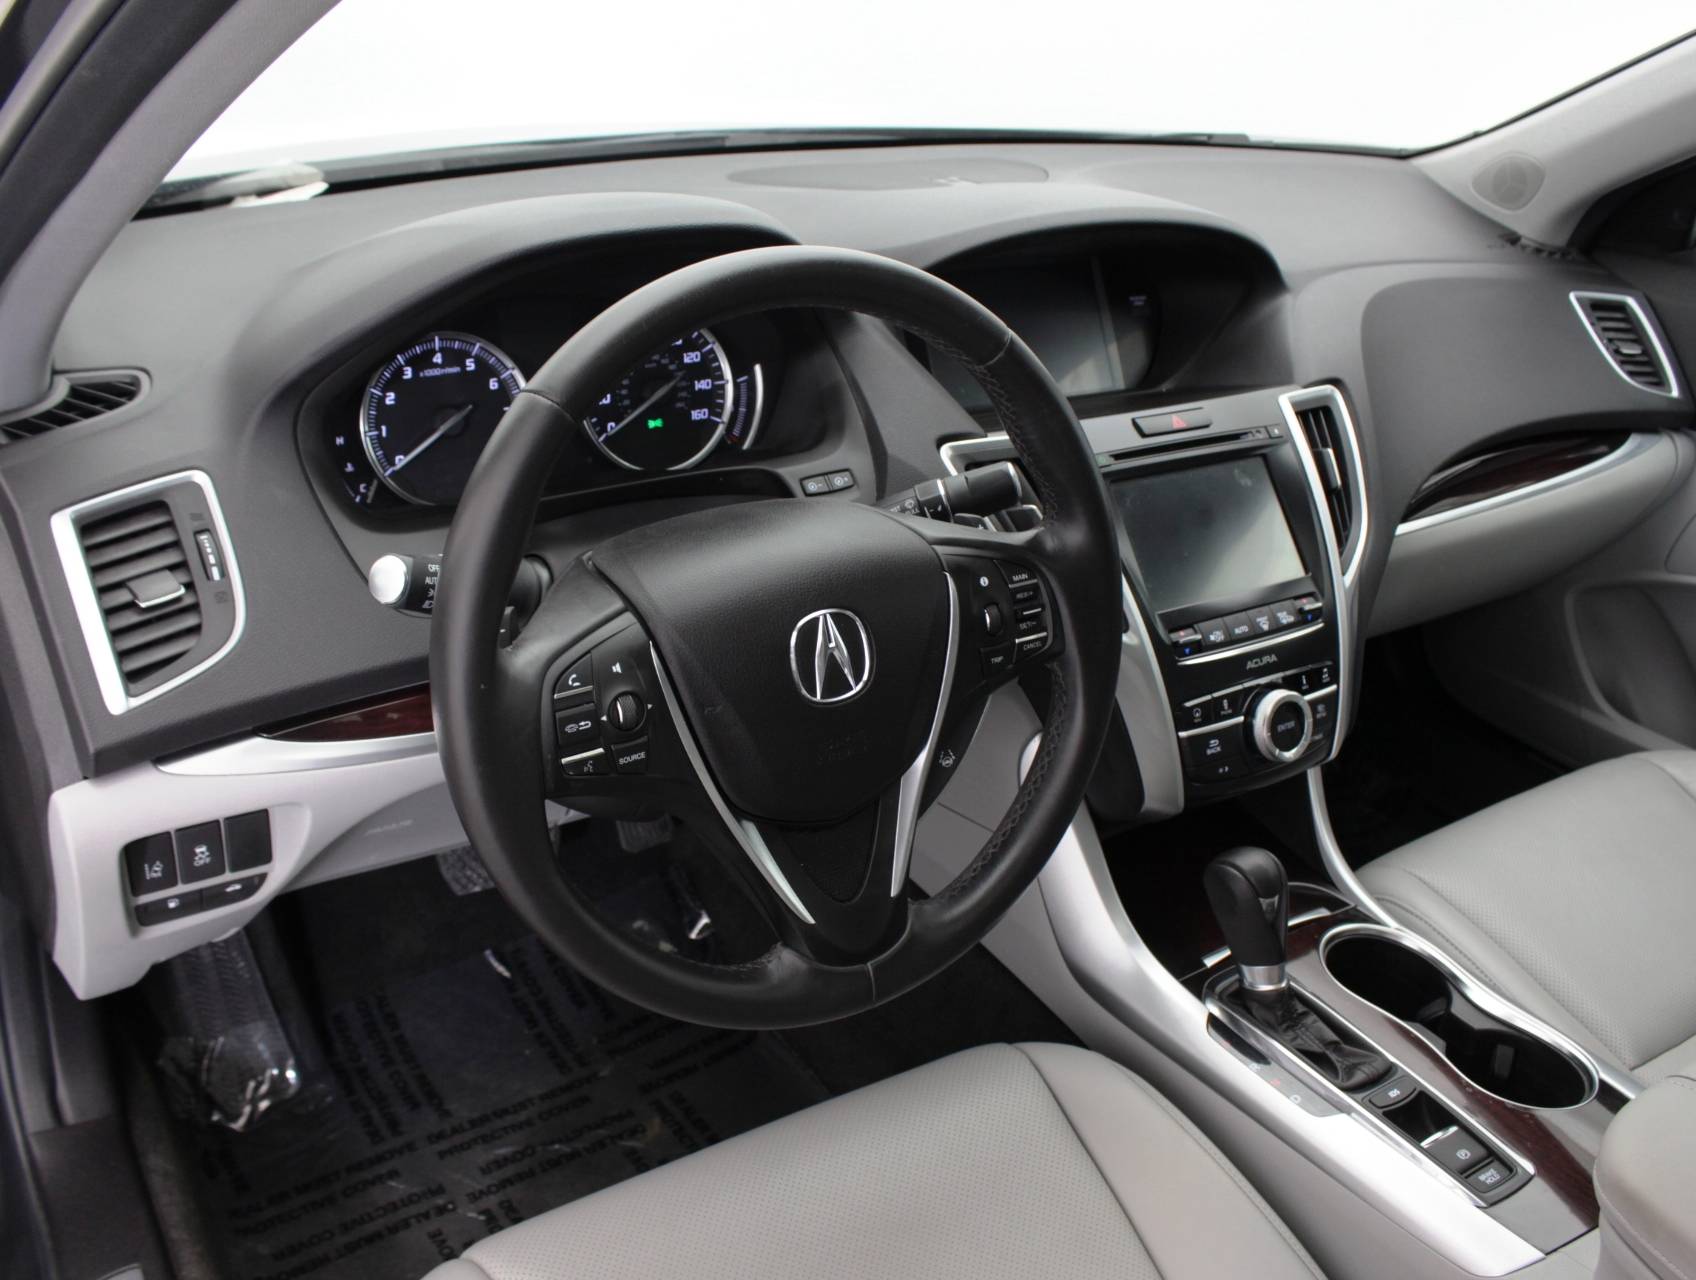 Florida Fine Cars - Used ACURA TLX 2015 HOLLYWOOD TECHNOLOGY PACKAGE